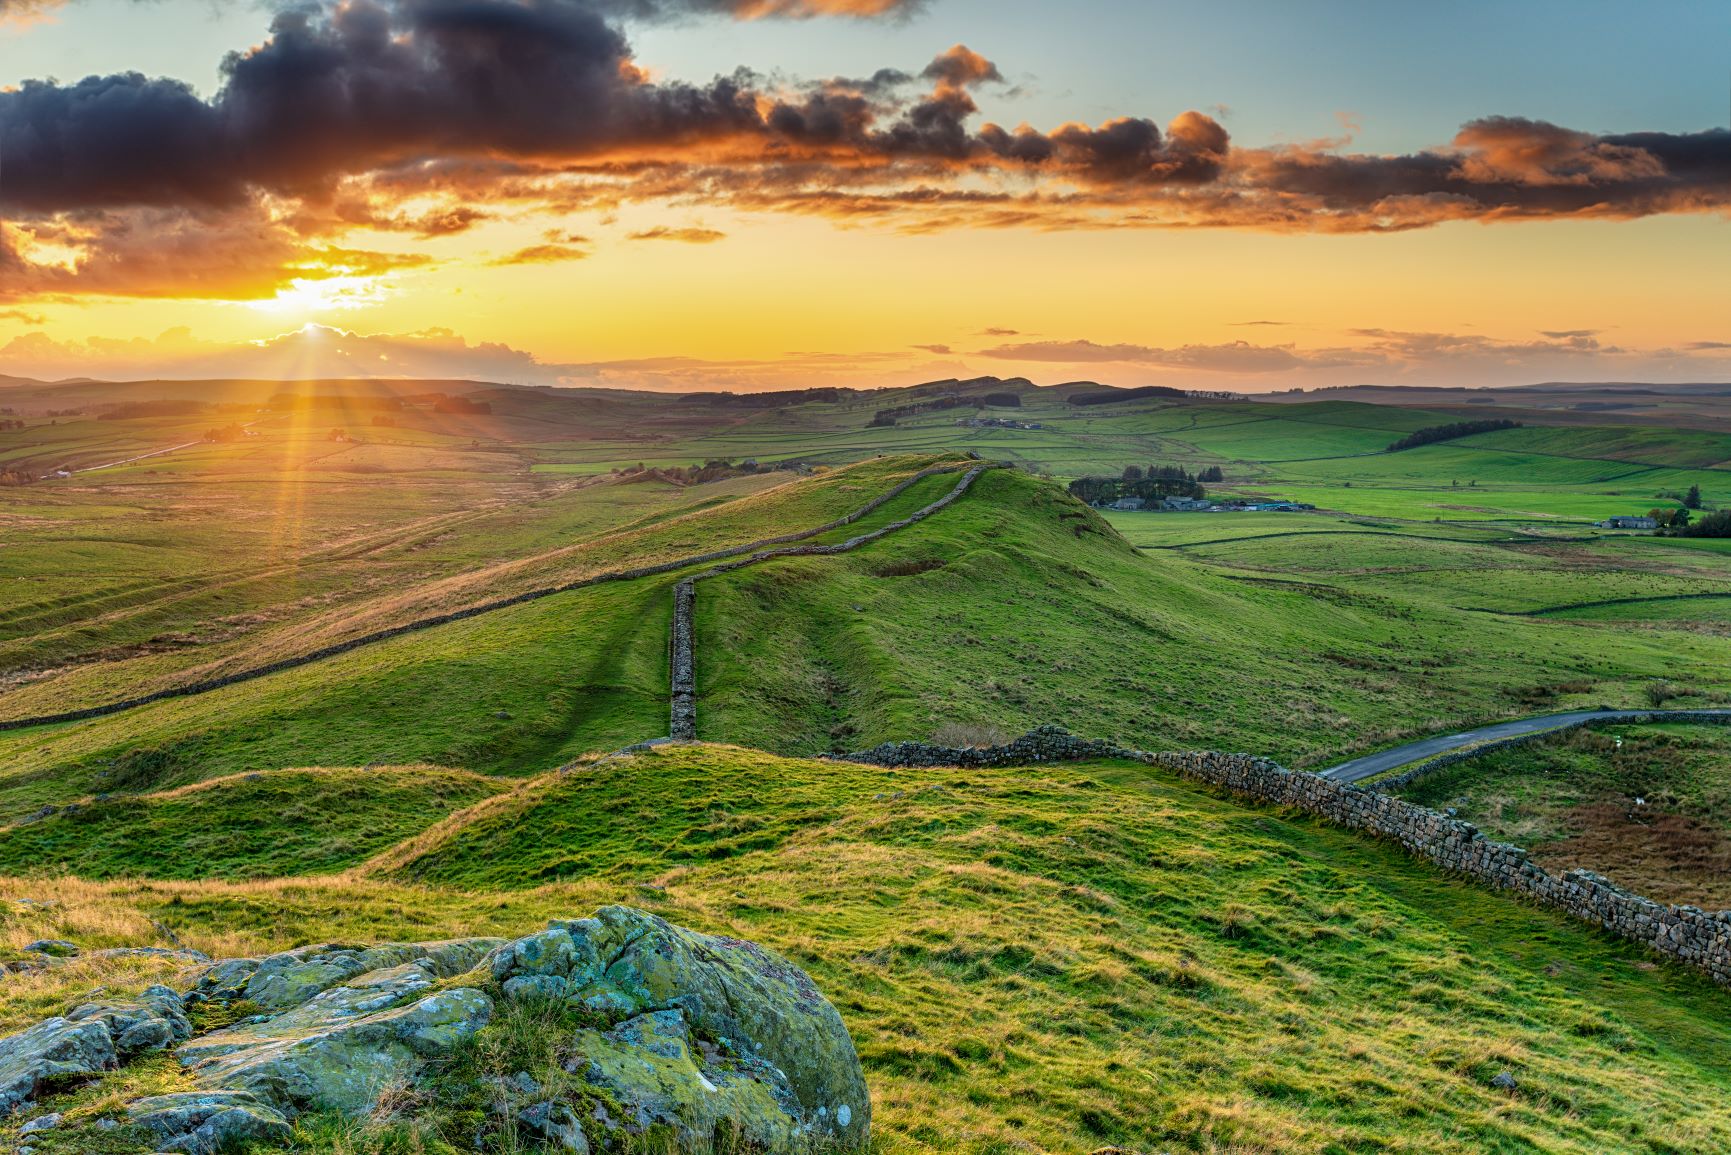 Sunset over Caw Gap at Hadrian's Wall